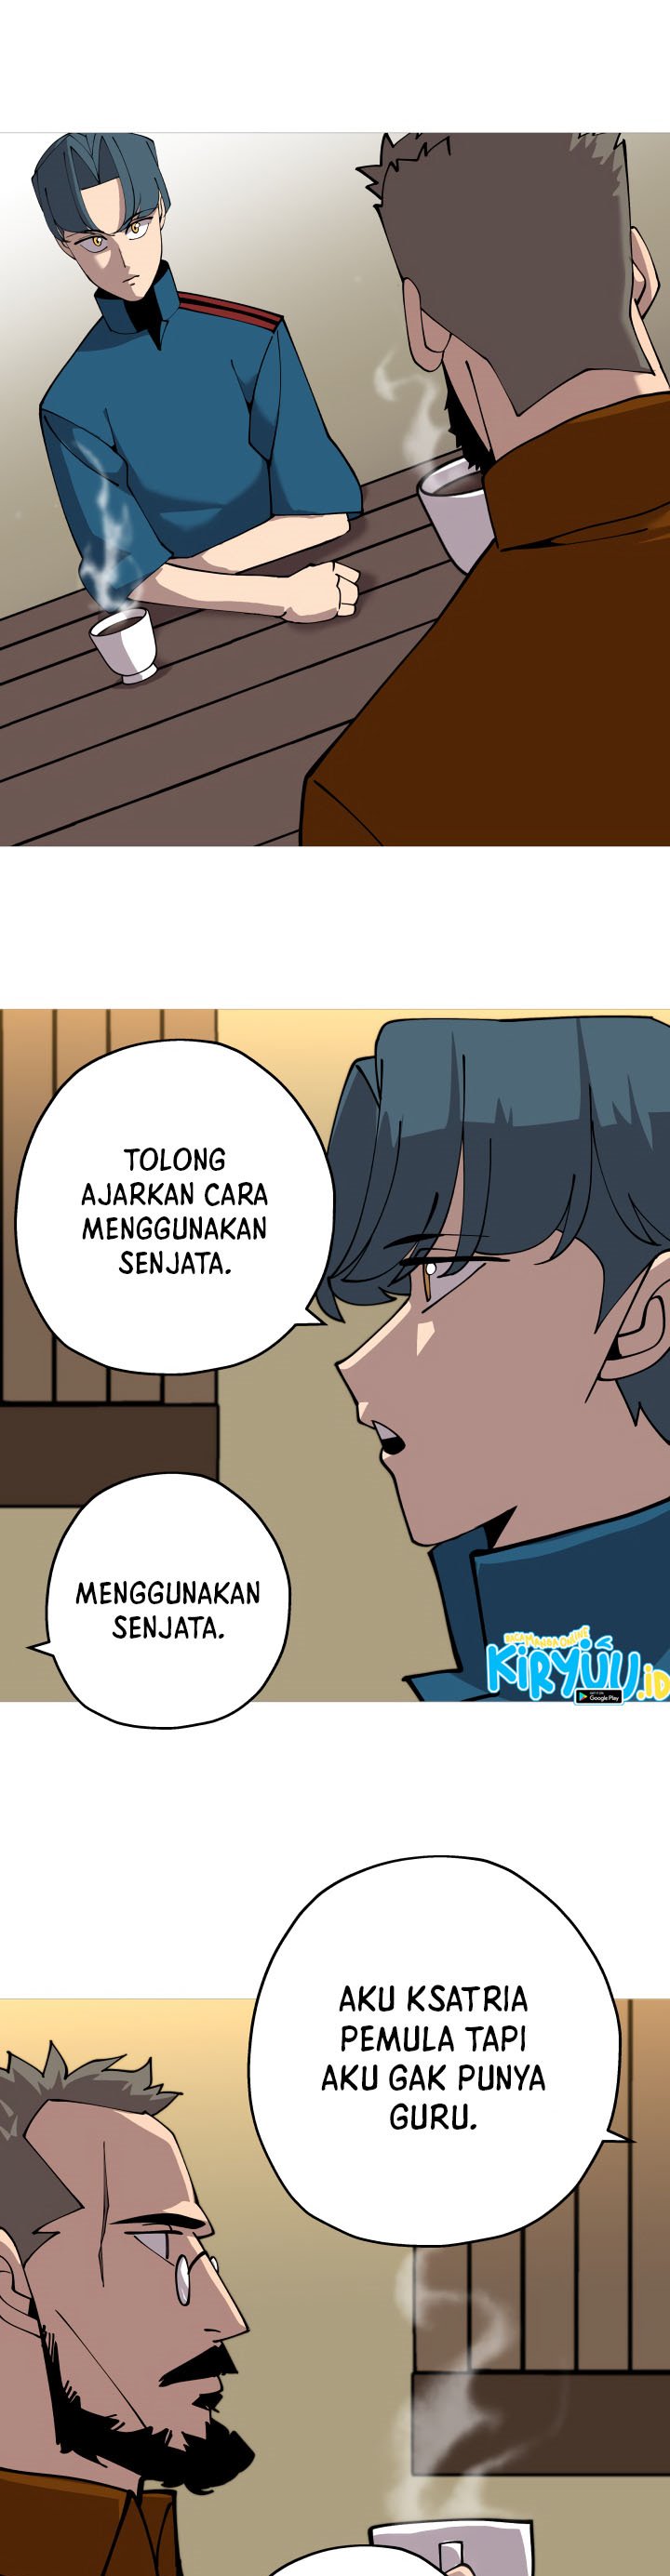 Dilarang COPAS - situs resmi www.mangacanblog.com - Komik the story of a low rank soldier becoming a monarch 024 - chapter 24 25 Indonesia the story of a low rank soldier becoming a monarch 024 - chapter 24 Terbaru 1|Baca Manga Komik Indonesia|Mangacan